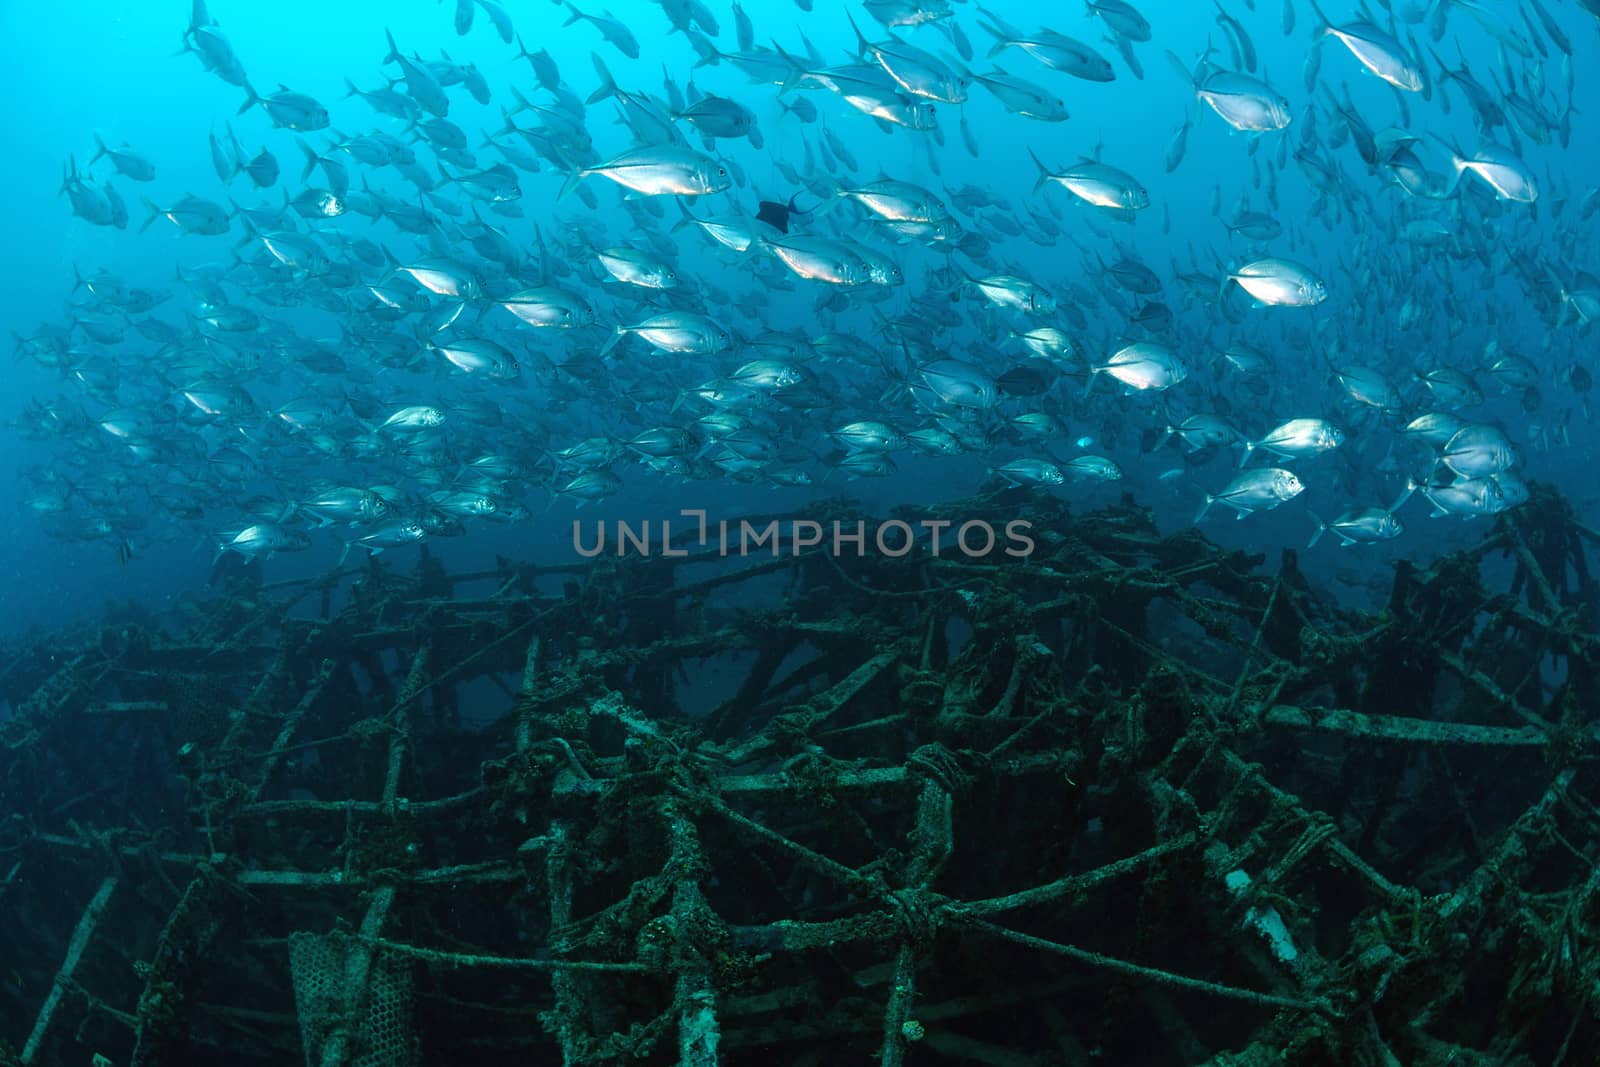 School of jackfish on artificial reef in Mabul, kapalai, Malaysi by think4photop